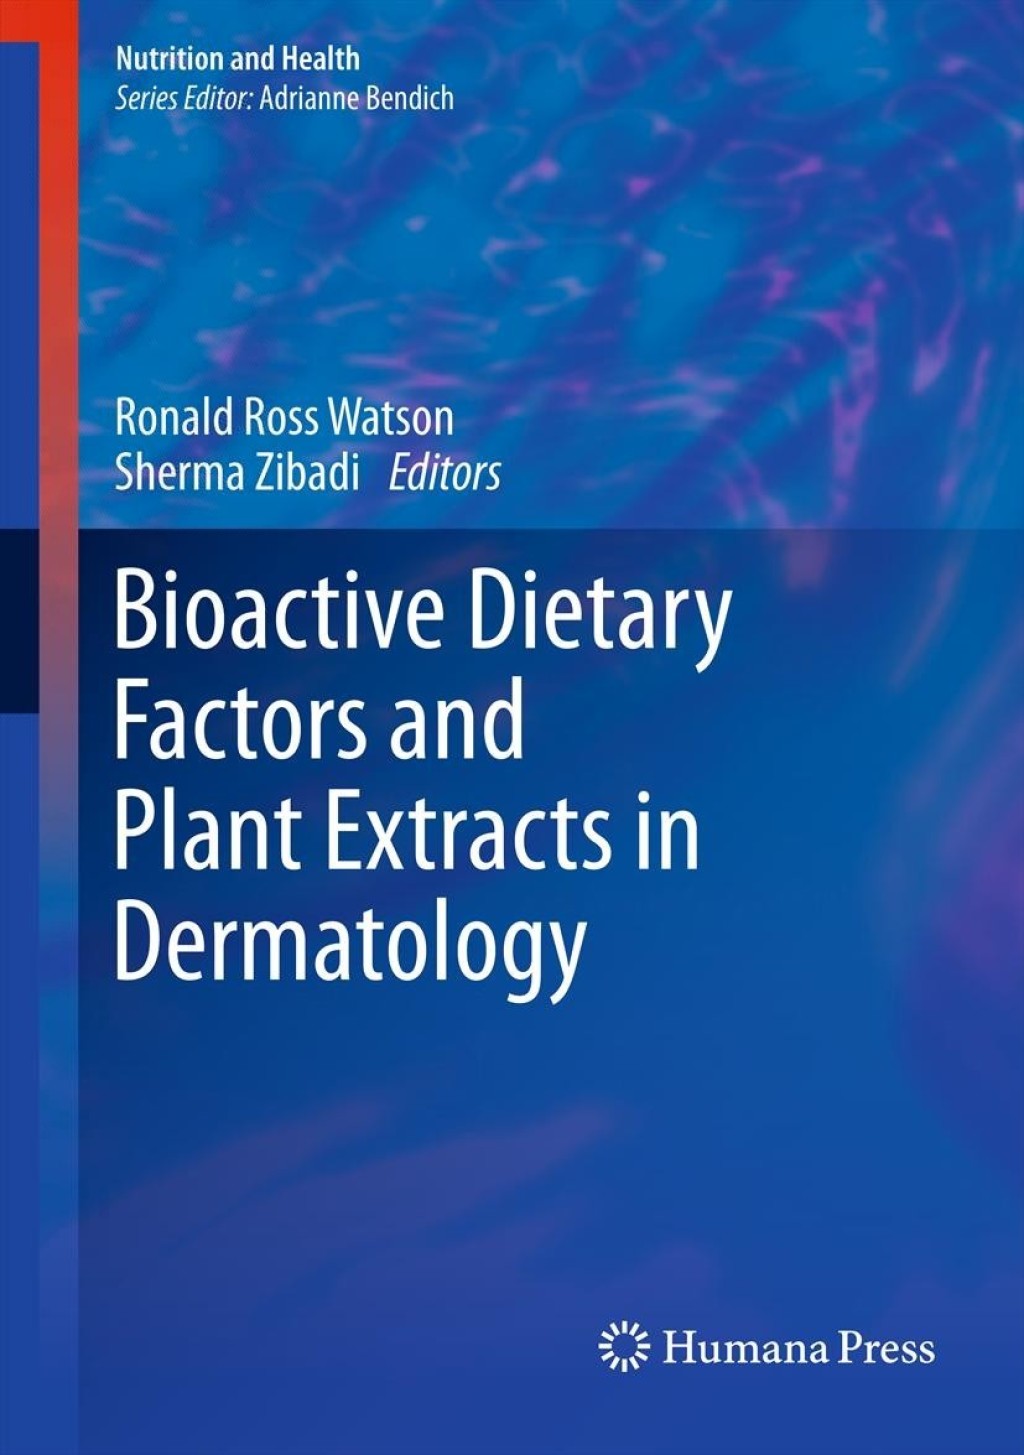 Bioactive Dietary Factors and Plant Extracts in Dermatology (eBook) - Ronald Ross Watson